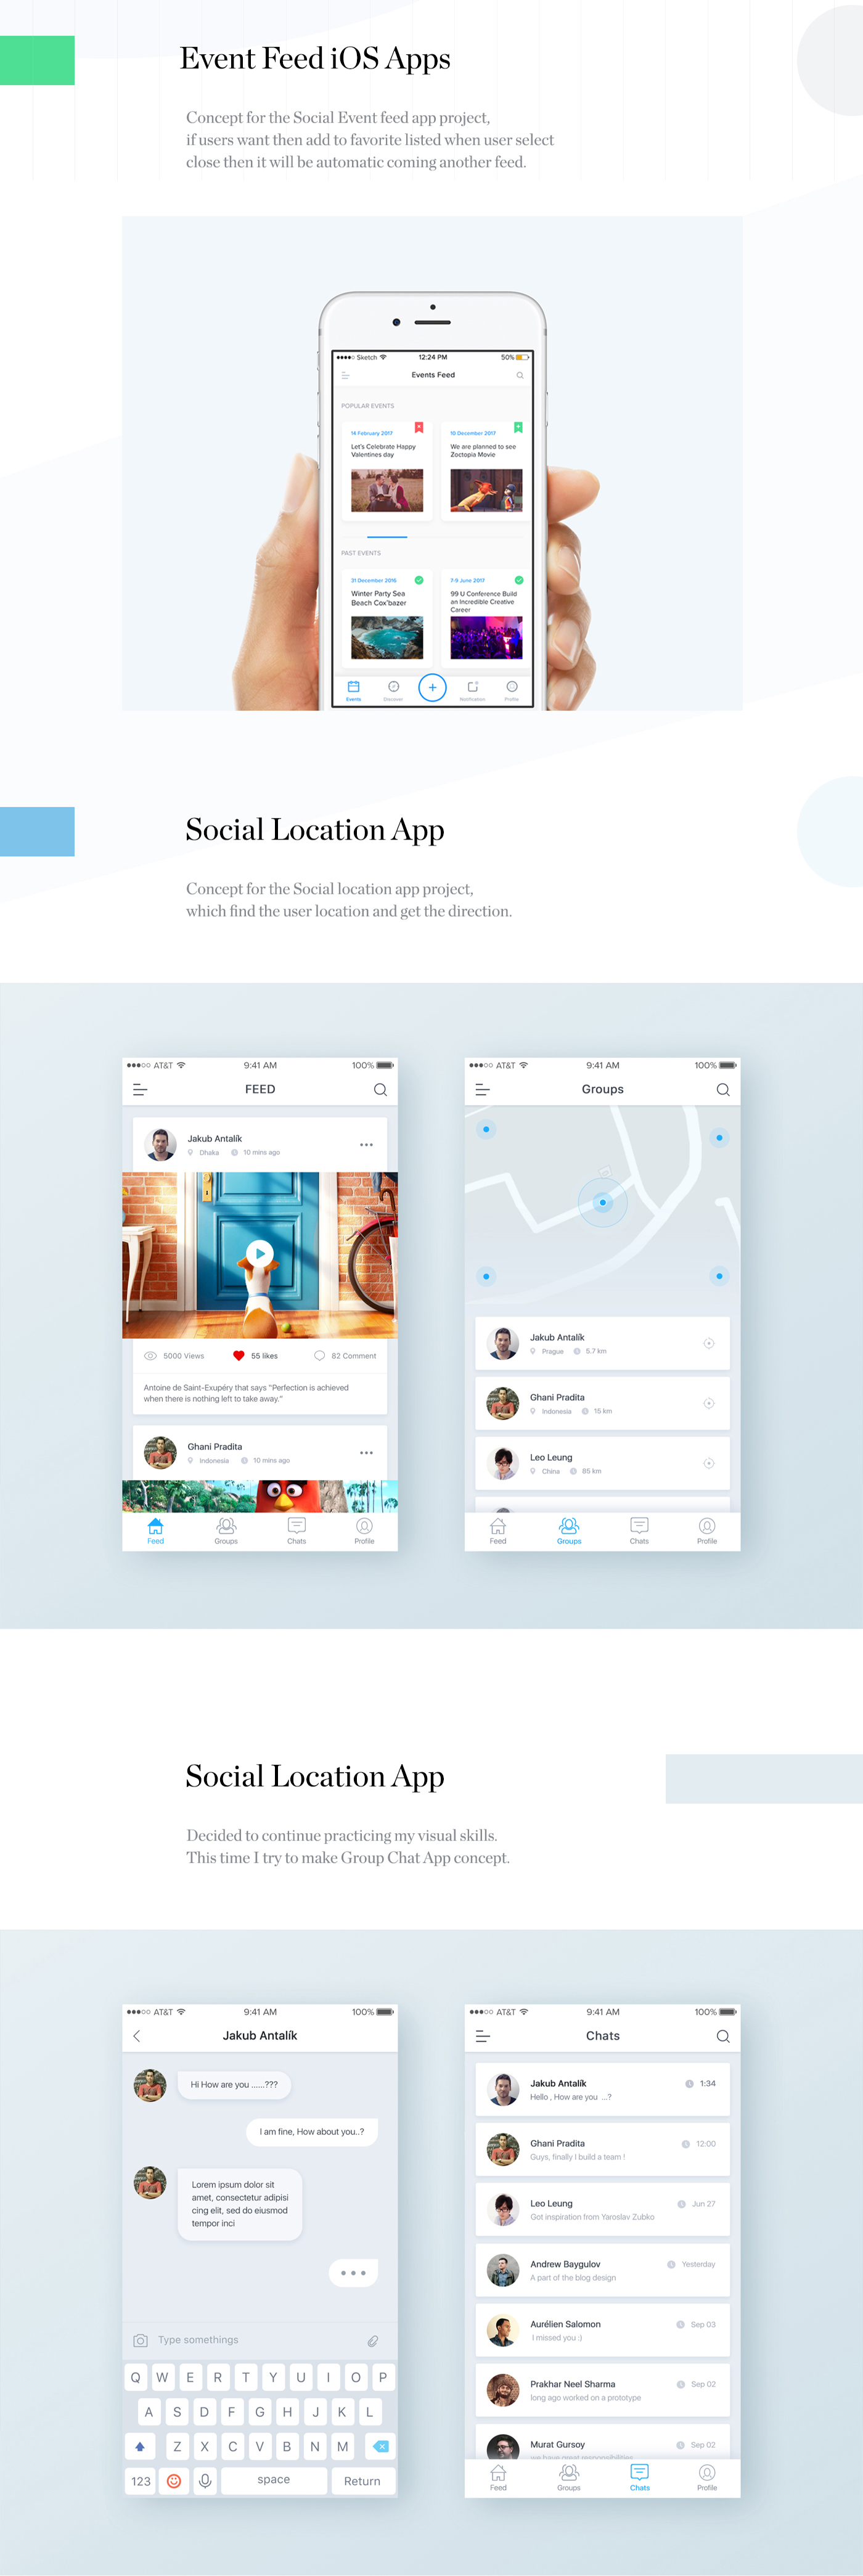 apps application onboarding iOS design social location app weather apps dating app shape app illustration icons